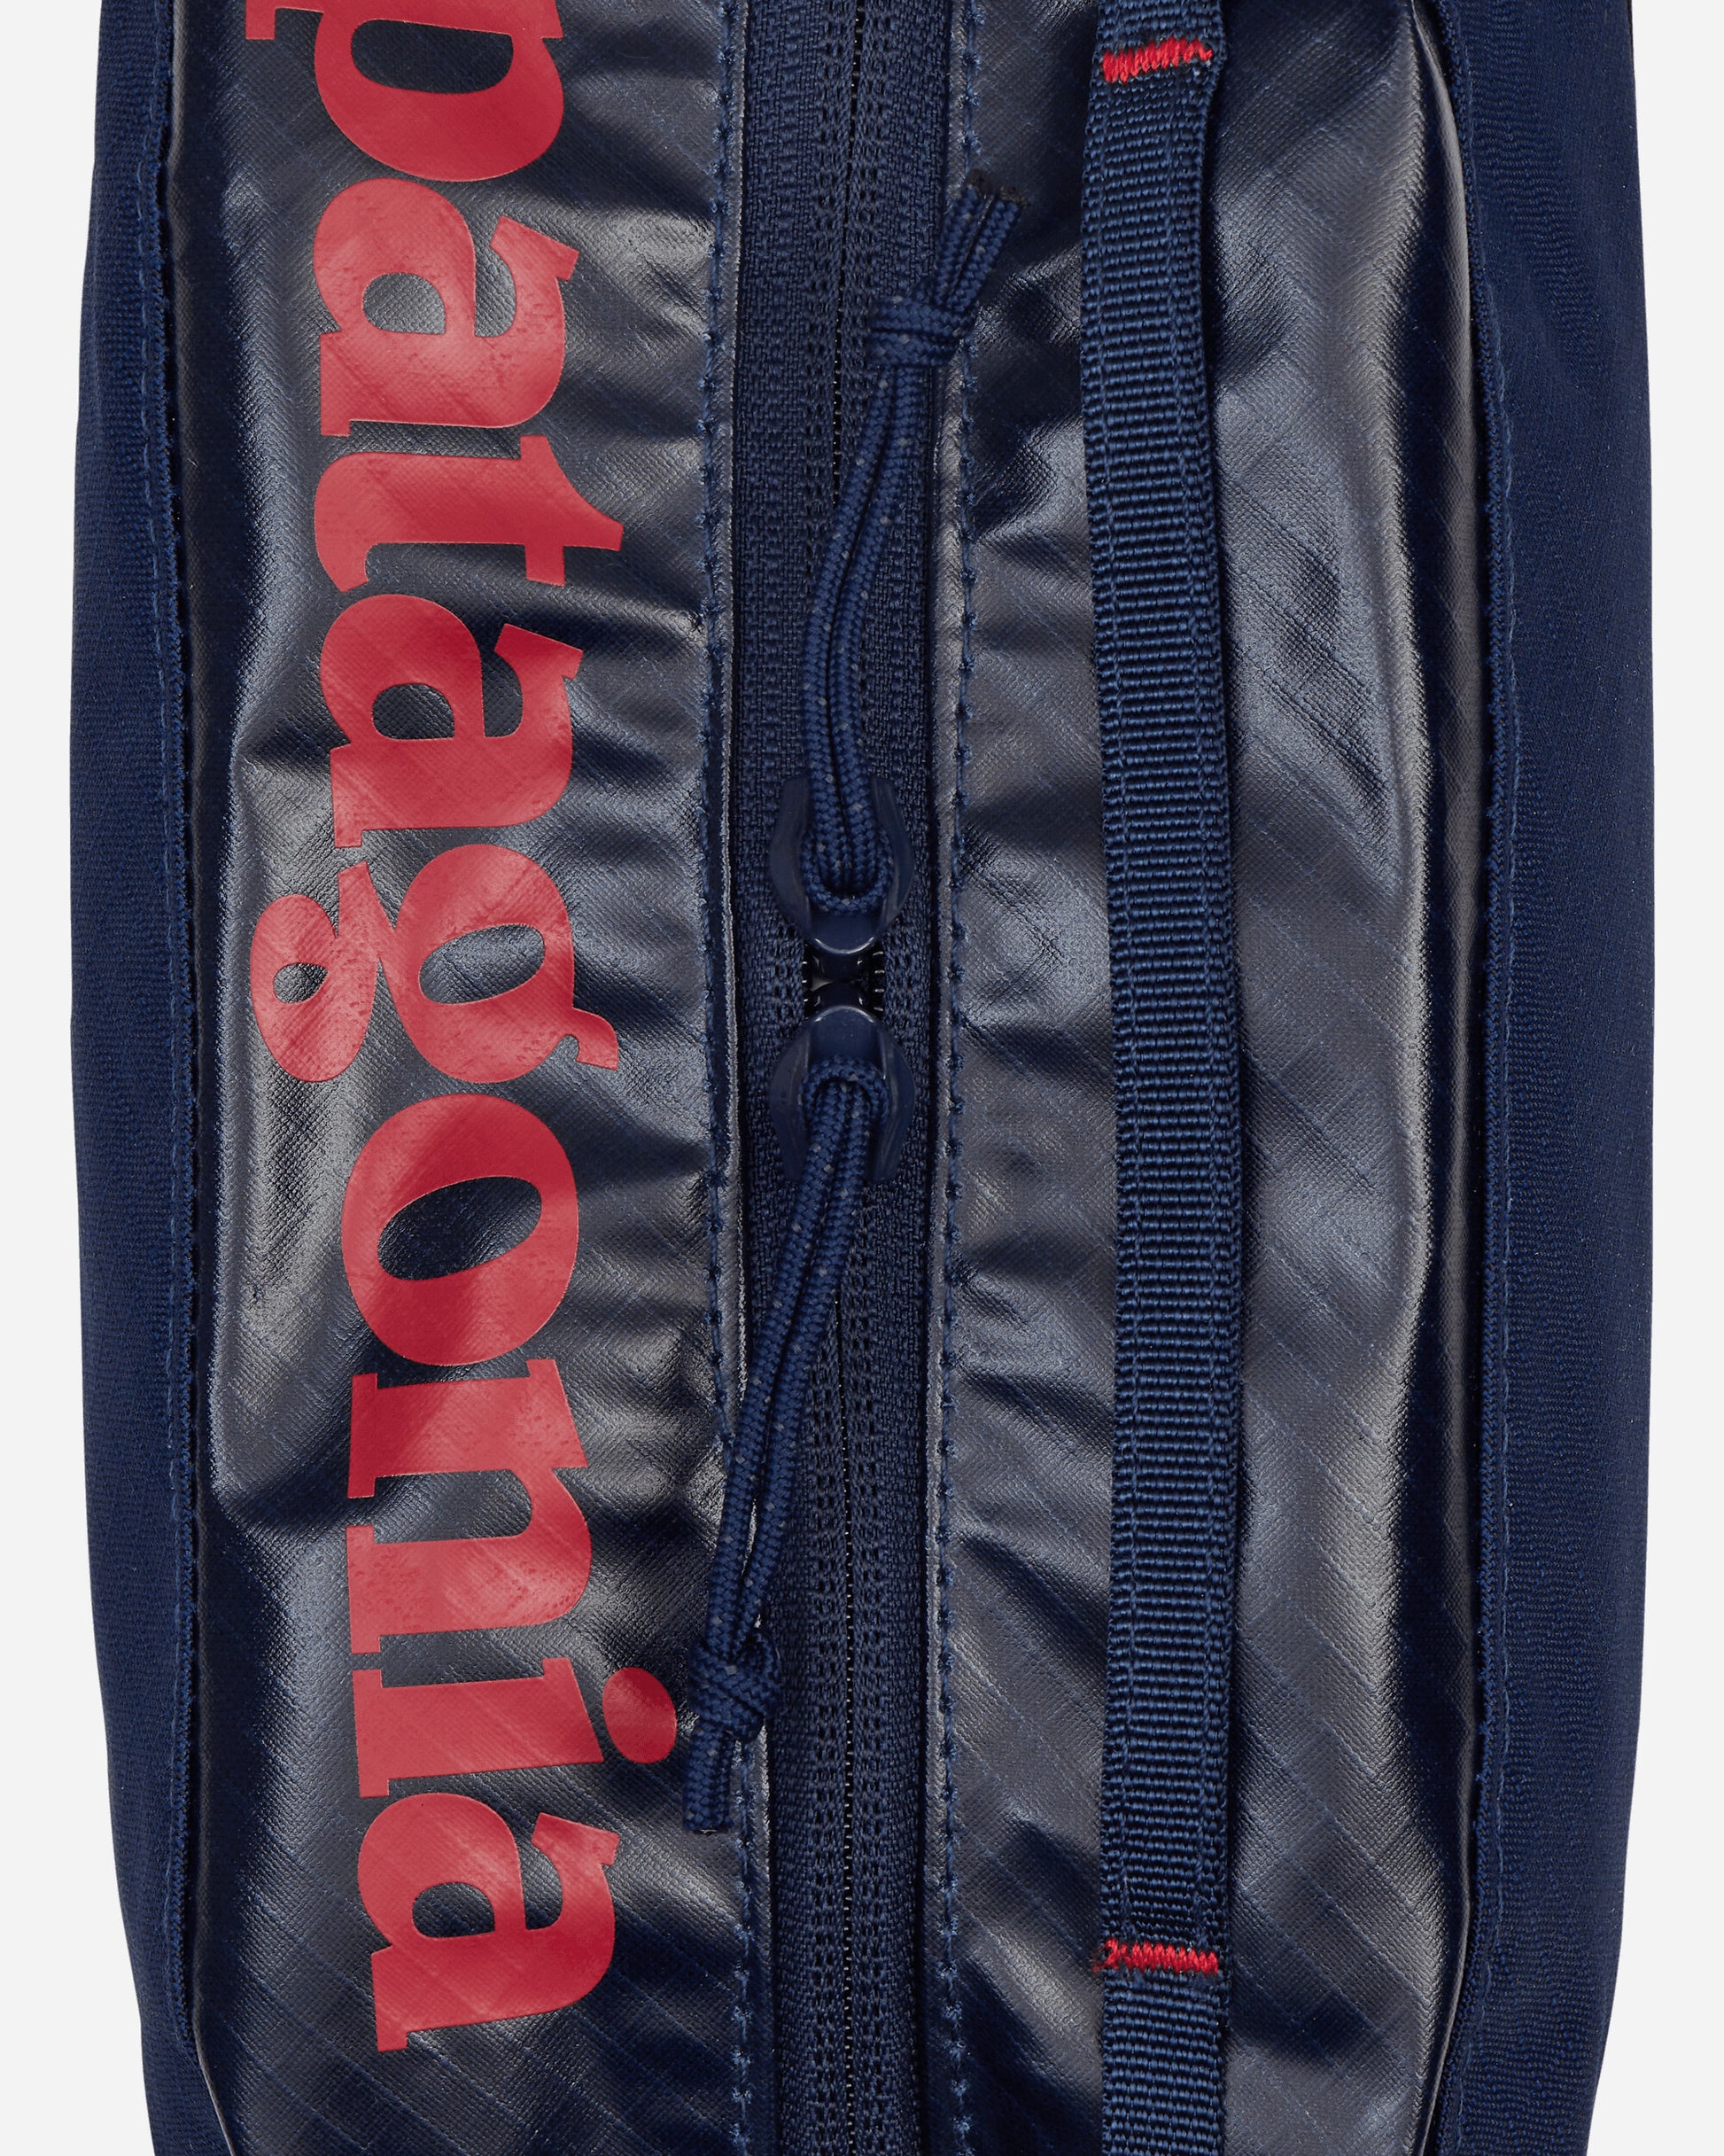 Patagonia Black Hole Cube - Medium Classic Navy Bags and Backpacks Pouches 49366 CNY